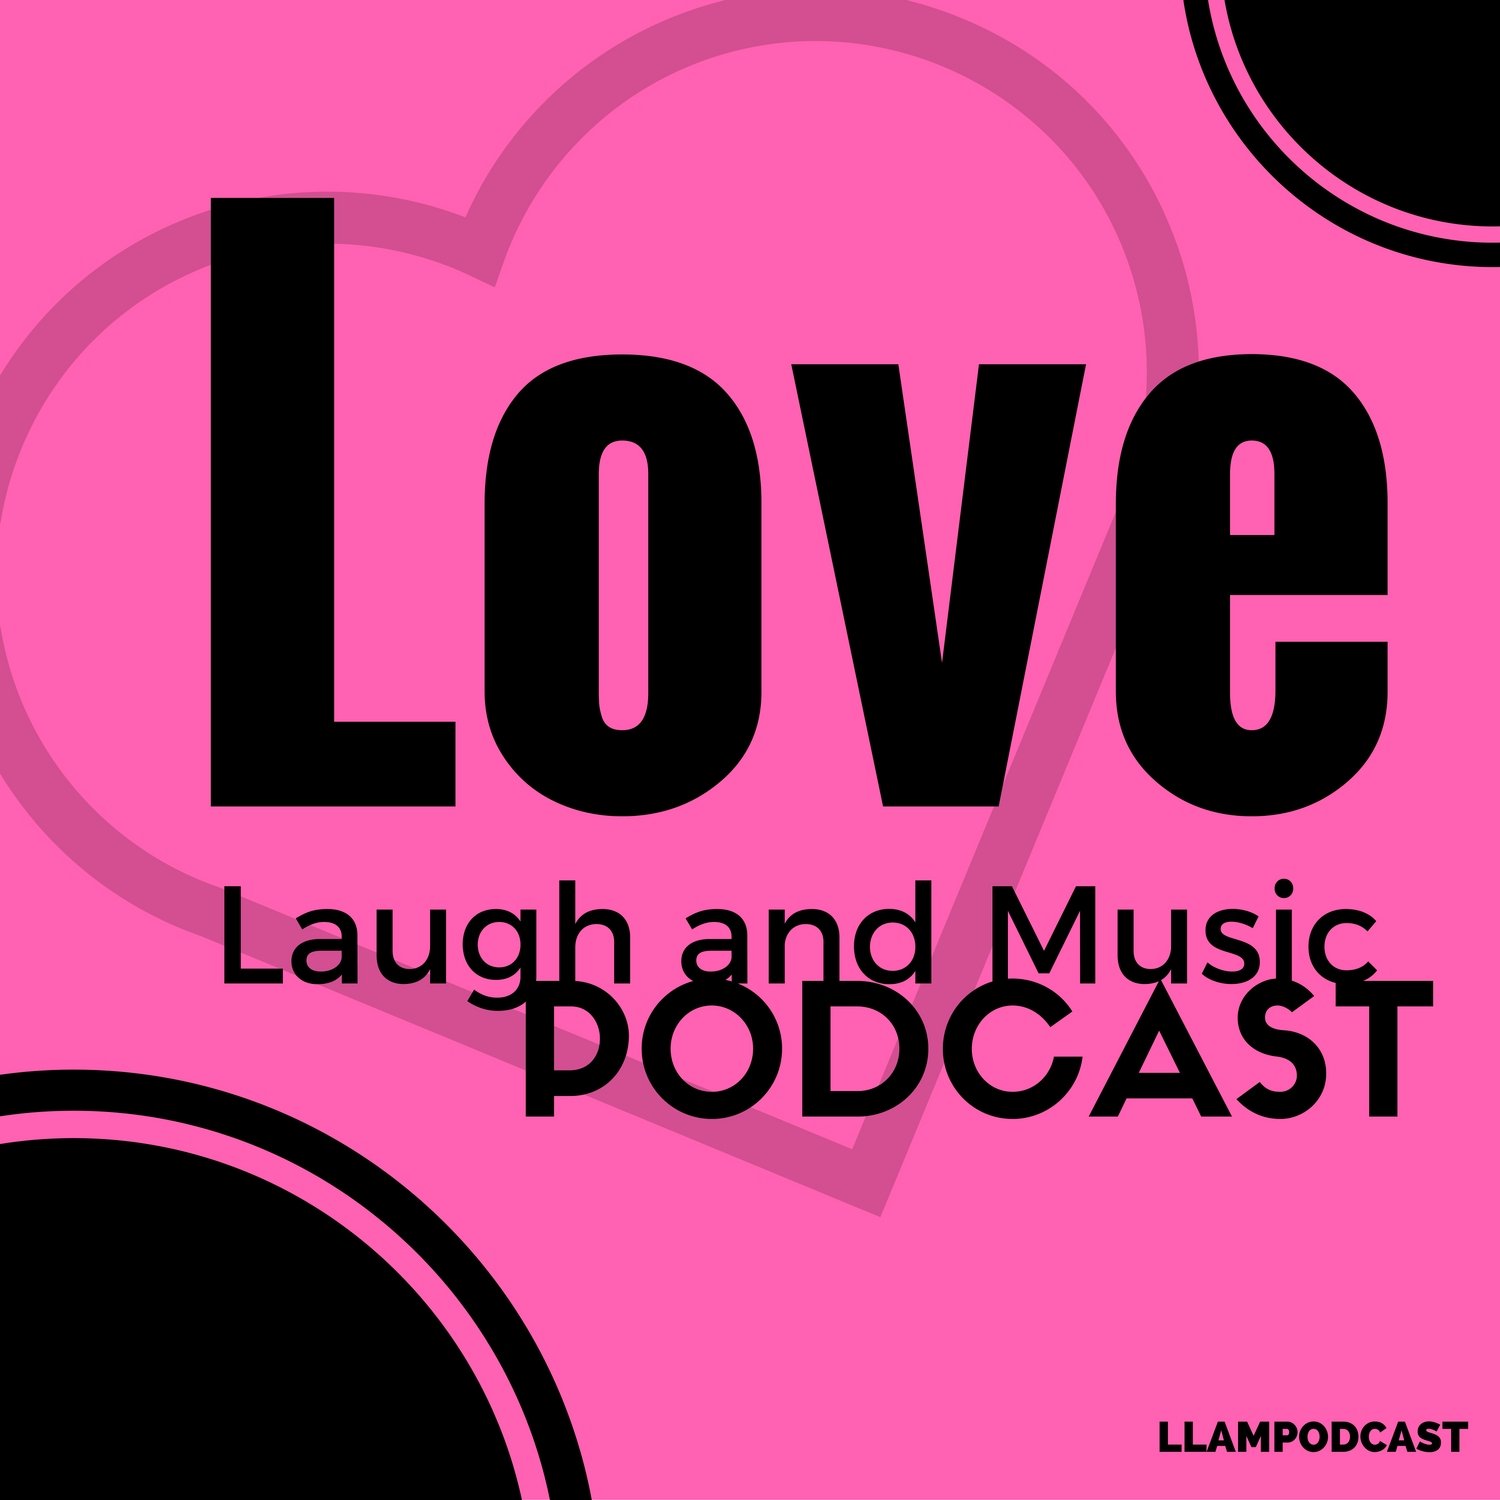 Podcast love laughing with friends and music tune in every week #podcasts #podcaster #podcasting #podernfamily #music #hiphop #marketing #love #life